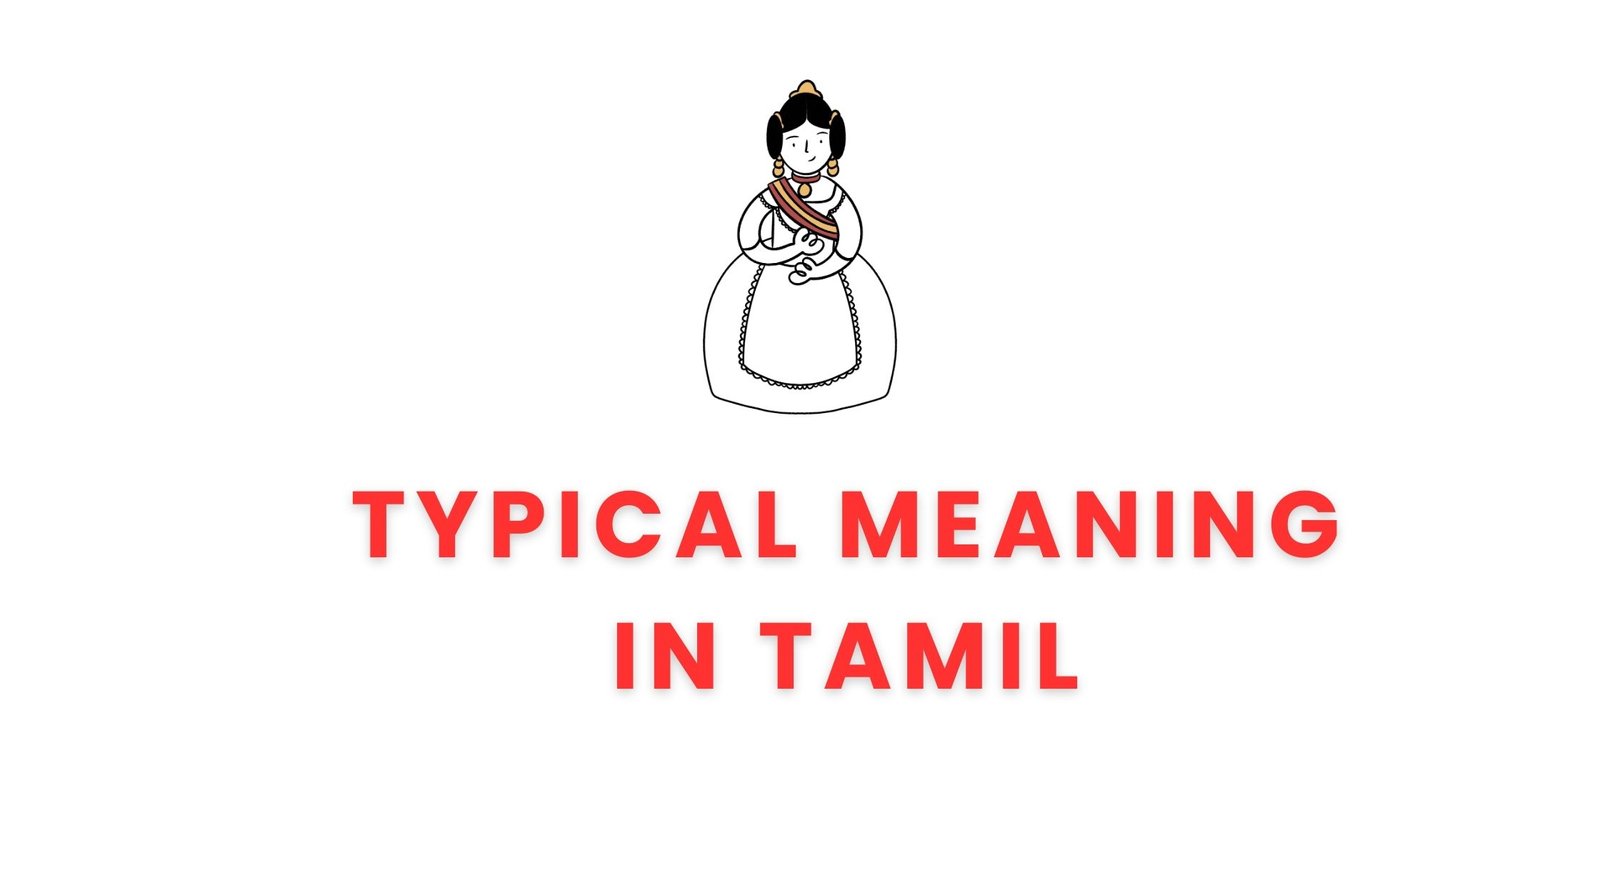 Typical Meaning in Tamil